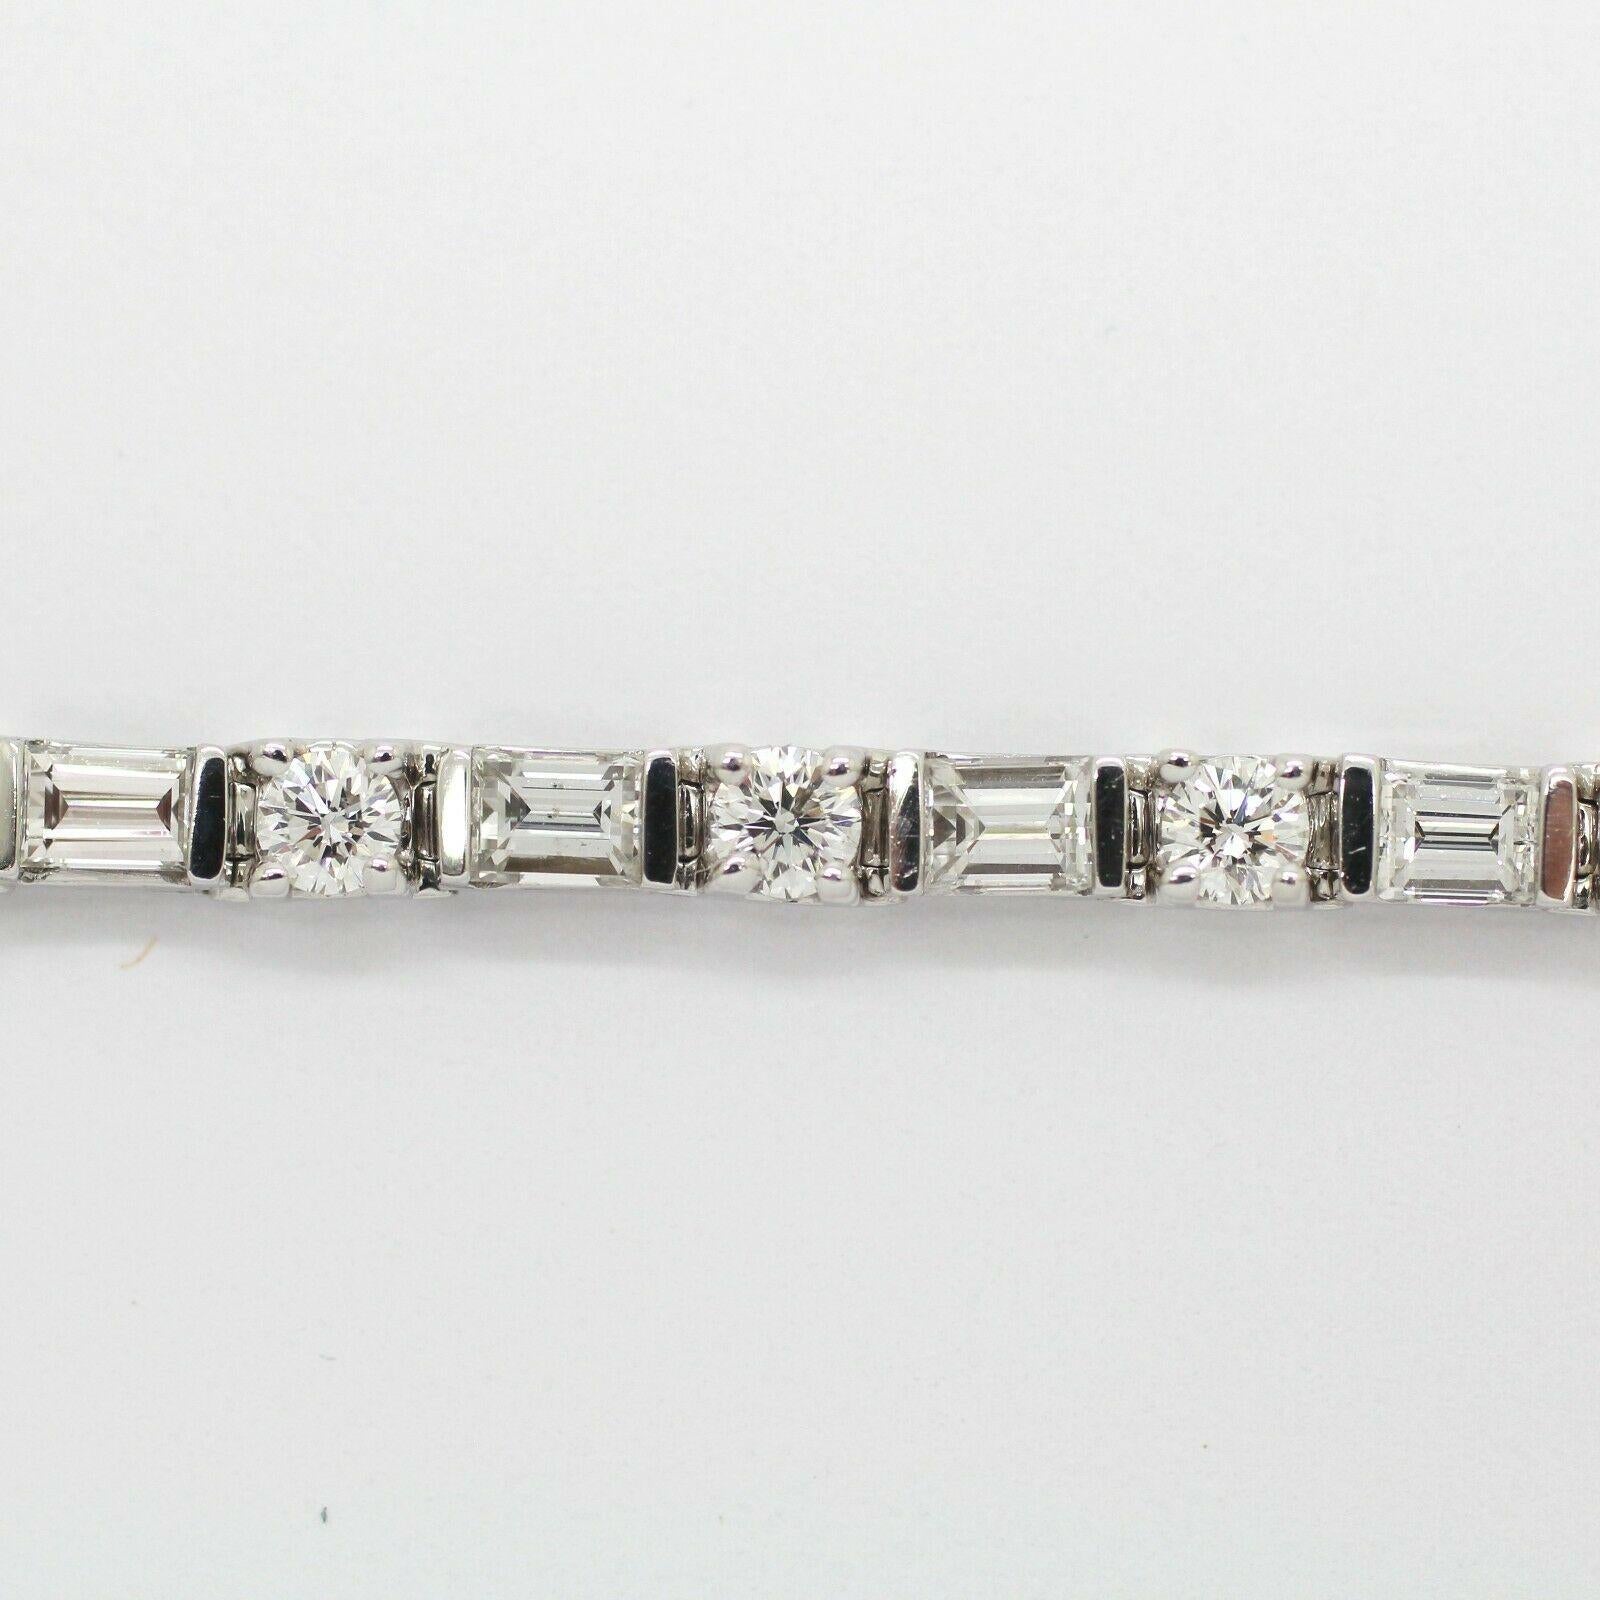 DIAMOND TENNIS BRACELET 
Specifications:
    main stone:ROUND AND BAGUETTES DIAMONDS
    diamonds:38 PCS
    carat total weight:5.09 CTW
    color:G
    clarity:VS
    THICKNESS:  3.14  mm
    WIDTH:  3.37  MM
    brand:CUSTOM MADE
    metal:14K